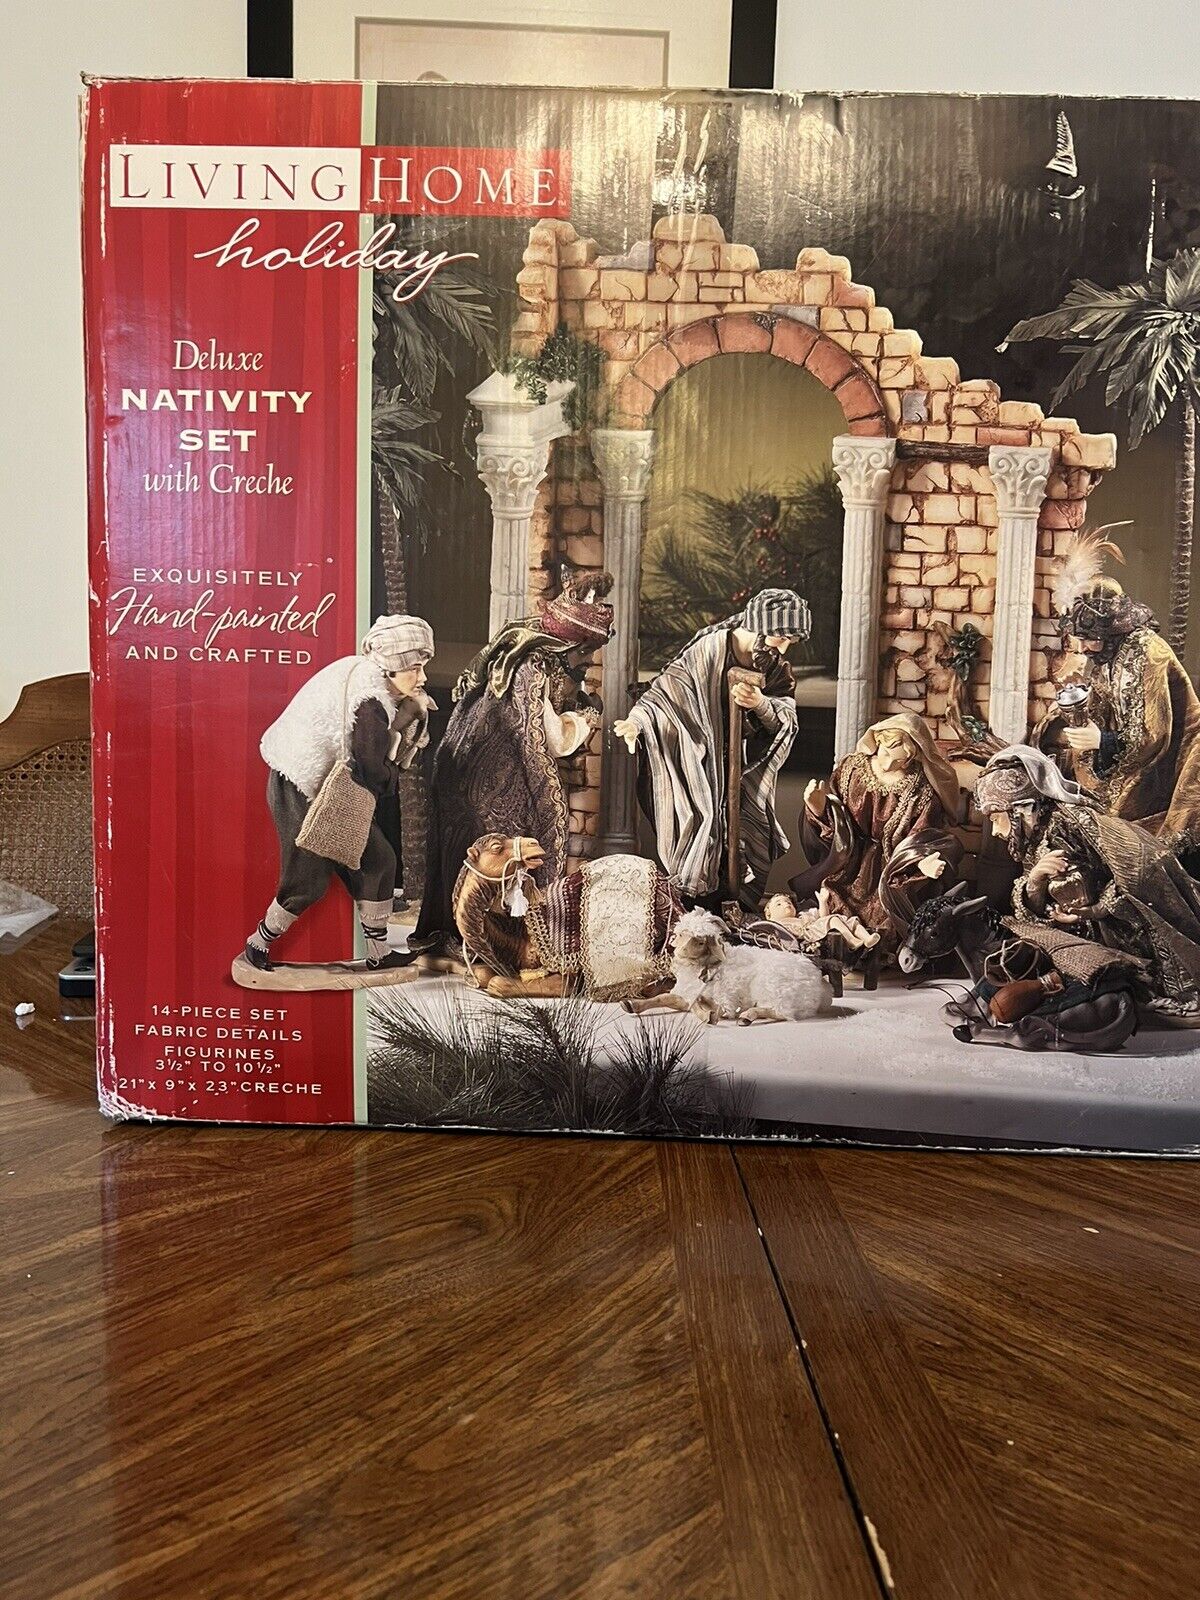 LIVING HOME HOLIDAY DELUXE NATIVITY SET WITH CRECHE READ DESCRIPTION 